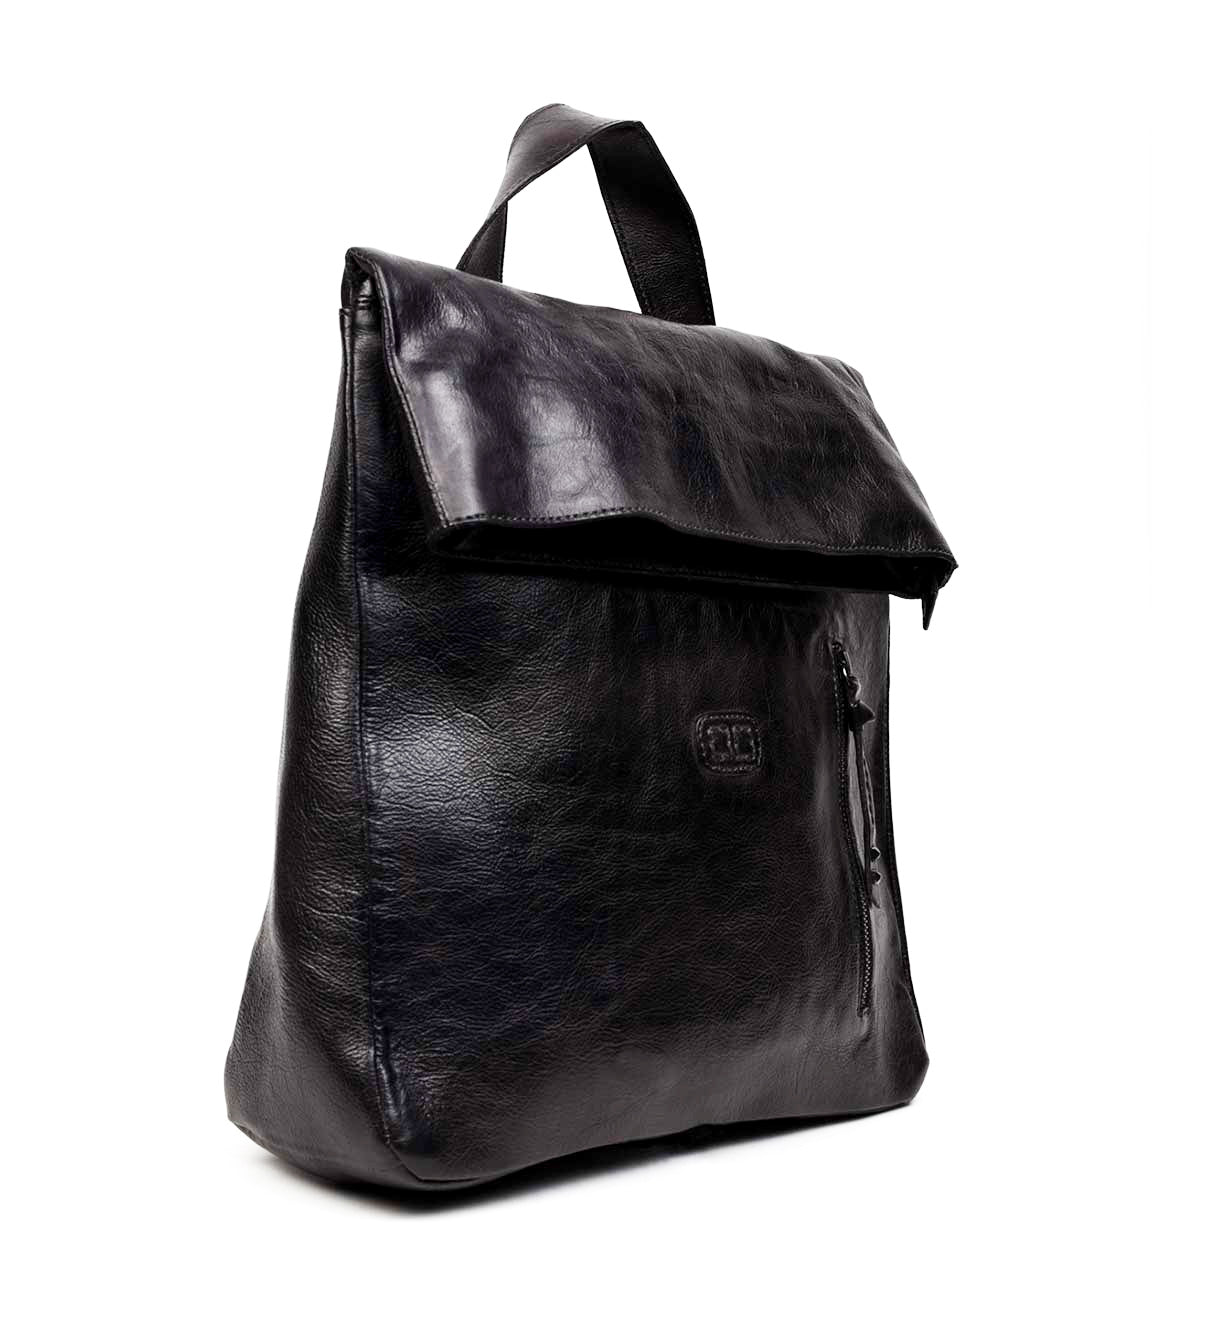 A black leather Howie backpack on a white background, made by Bed Stu.